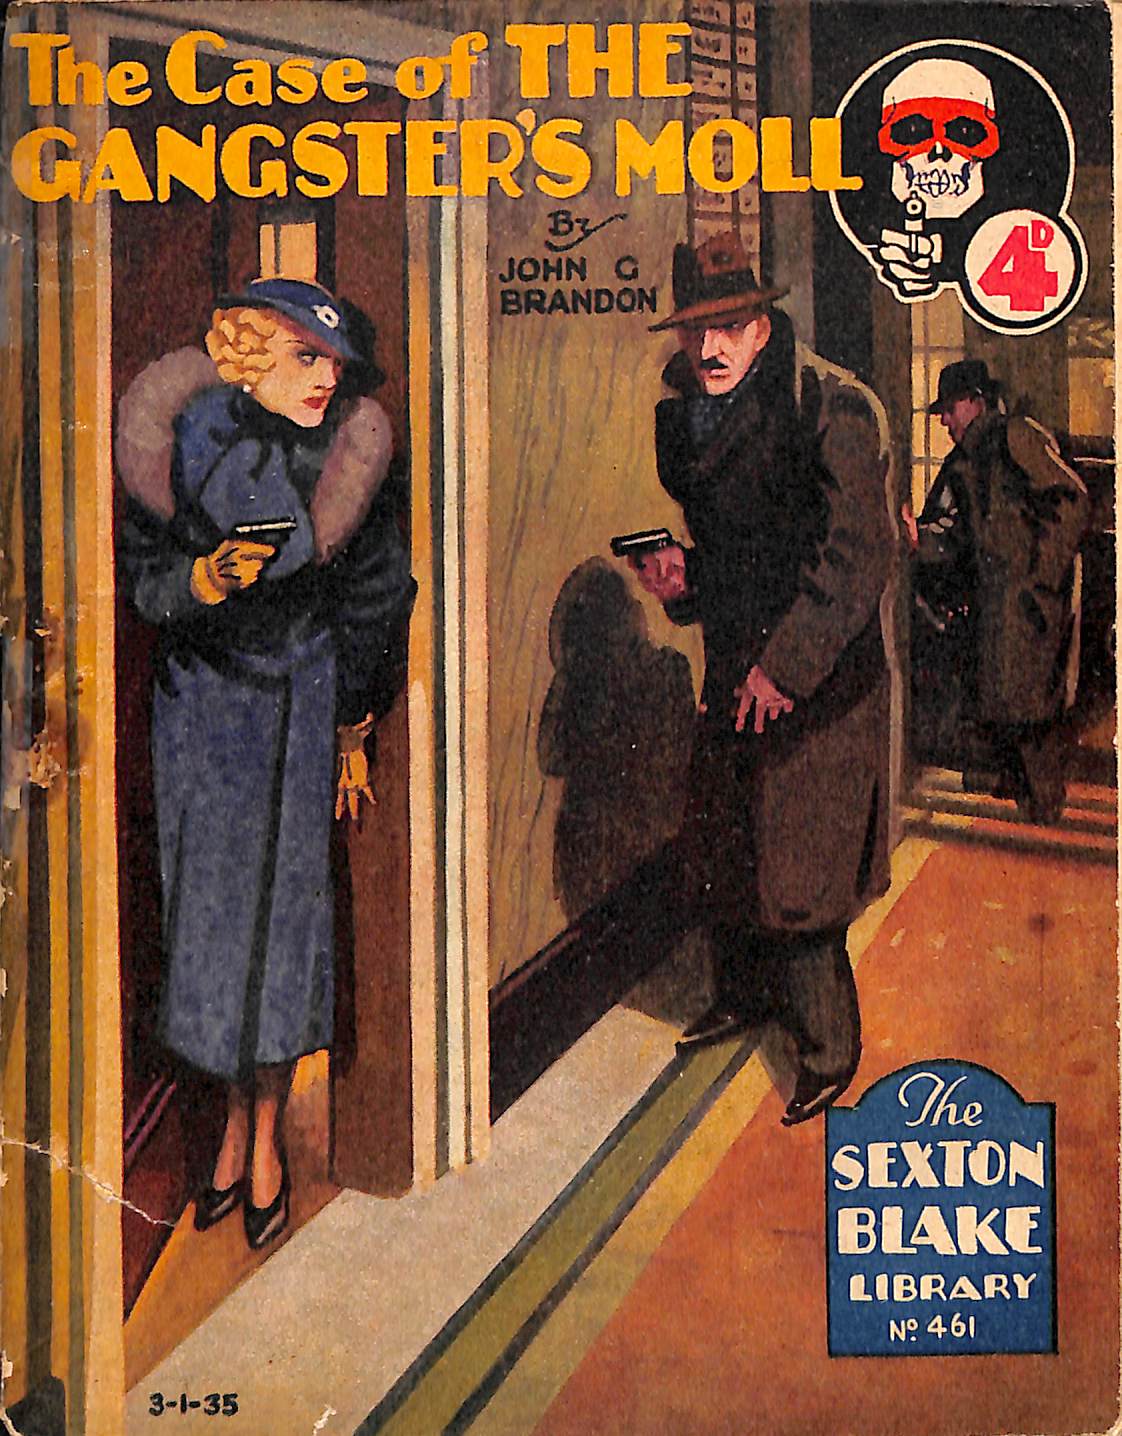 Comic Book Cover For Sexton Blake Library S2 461 - The Case of the Gangster's Moll